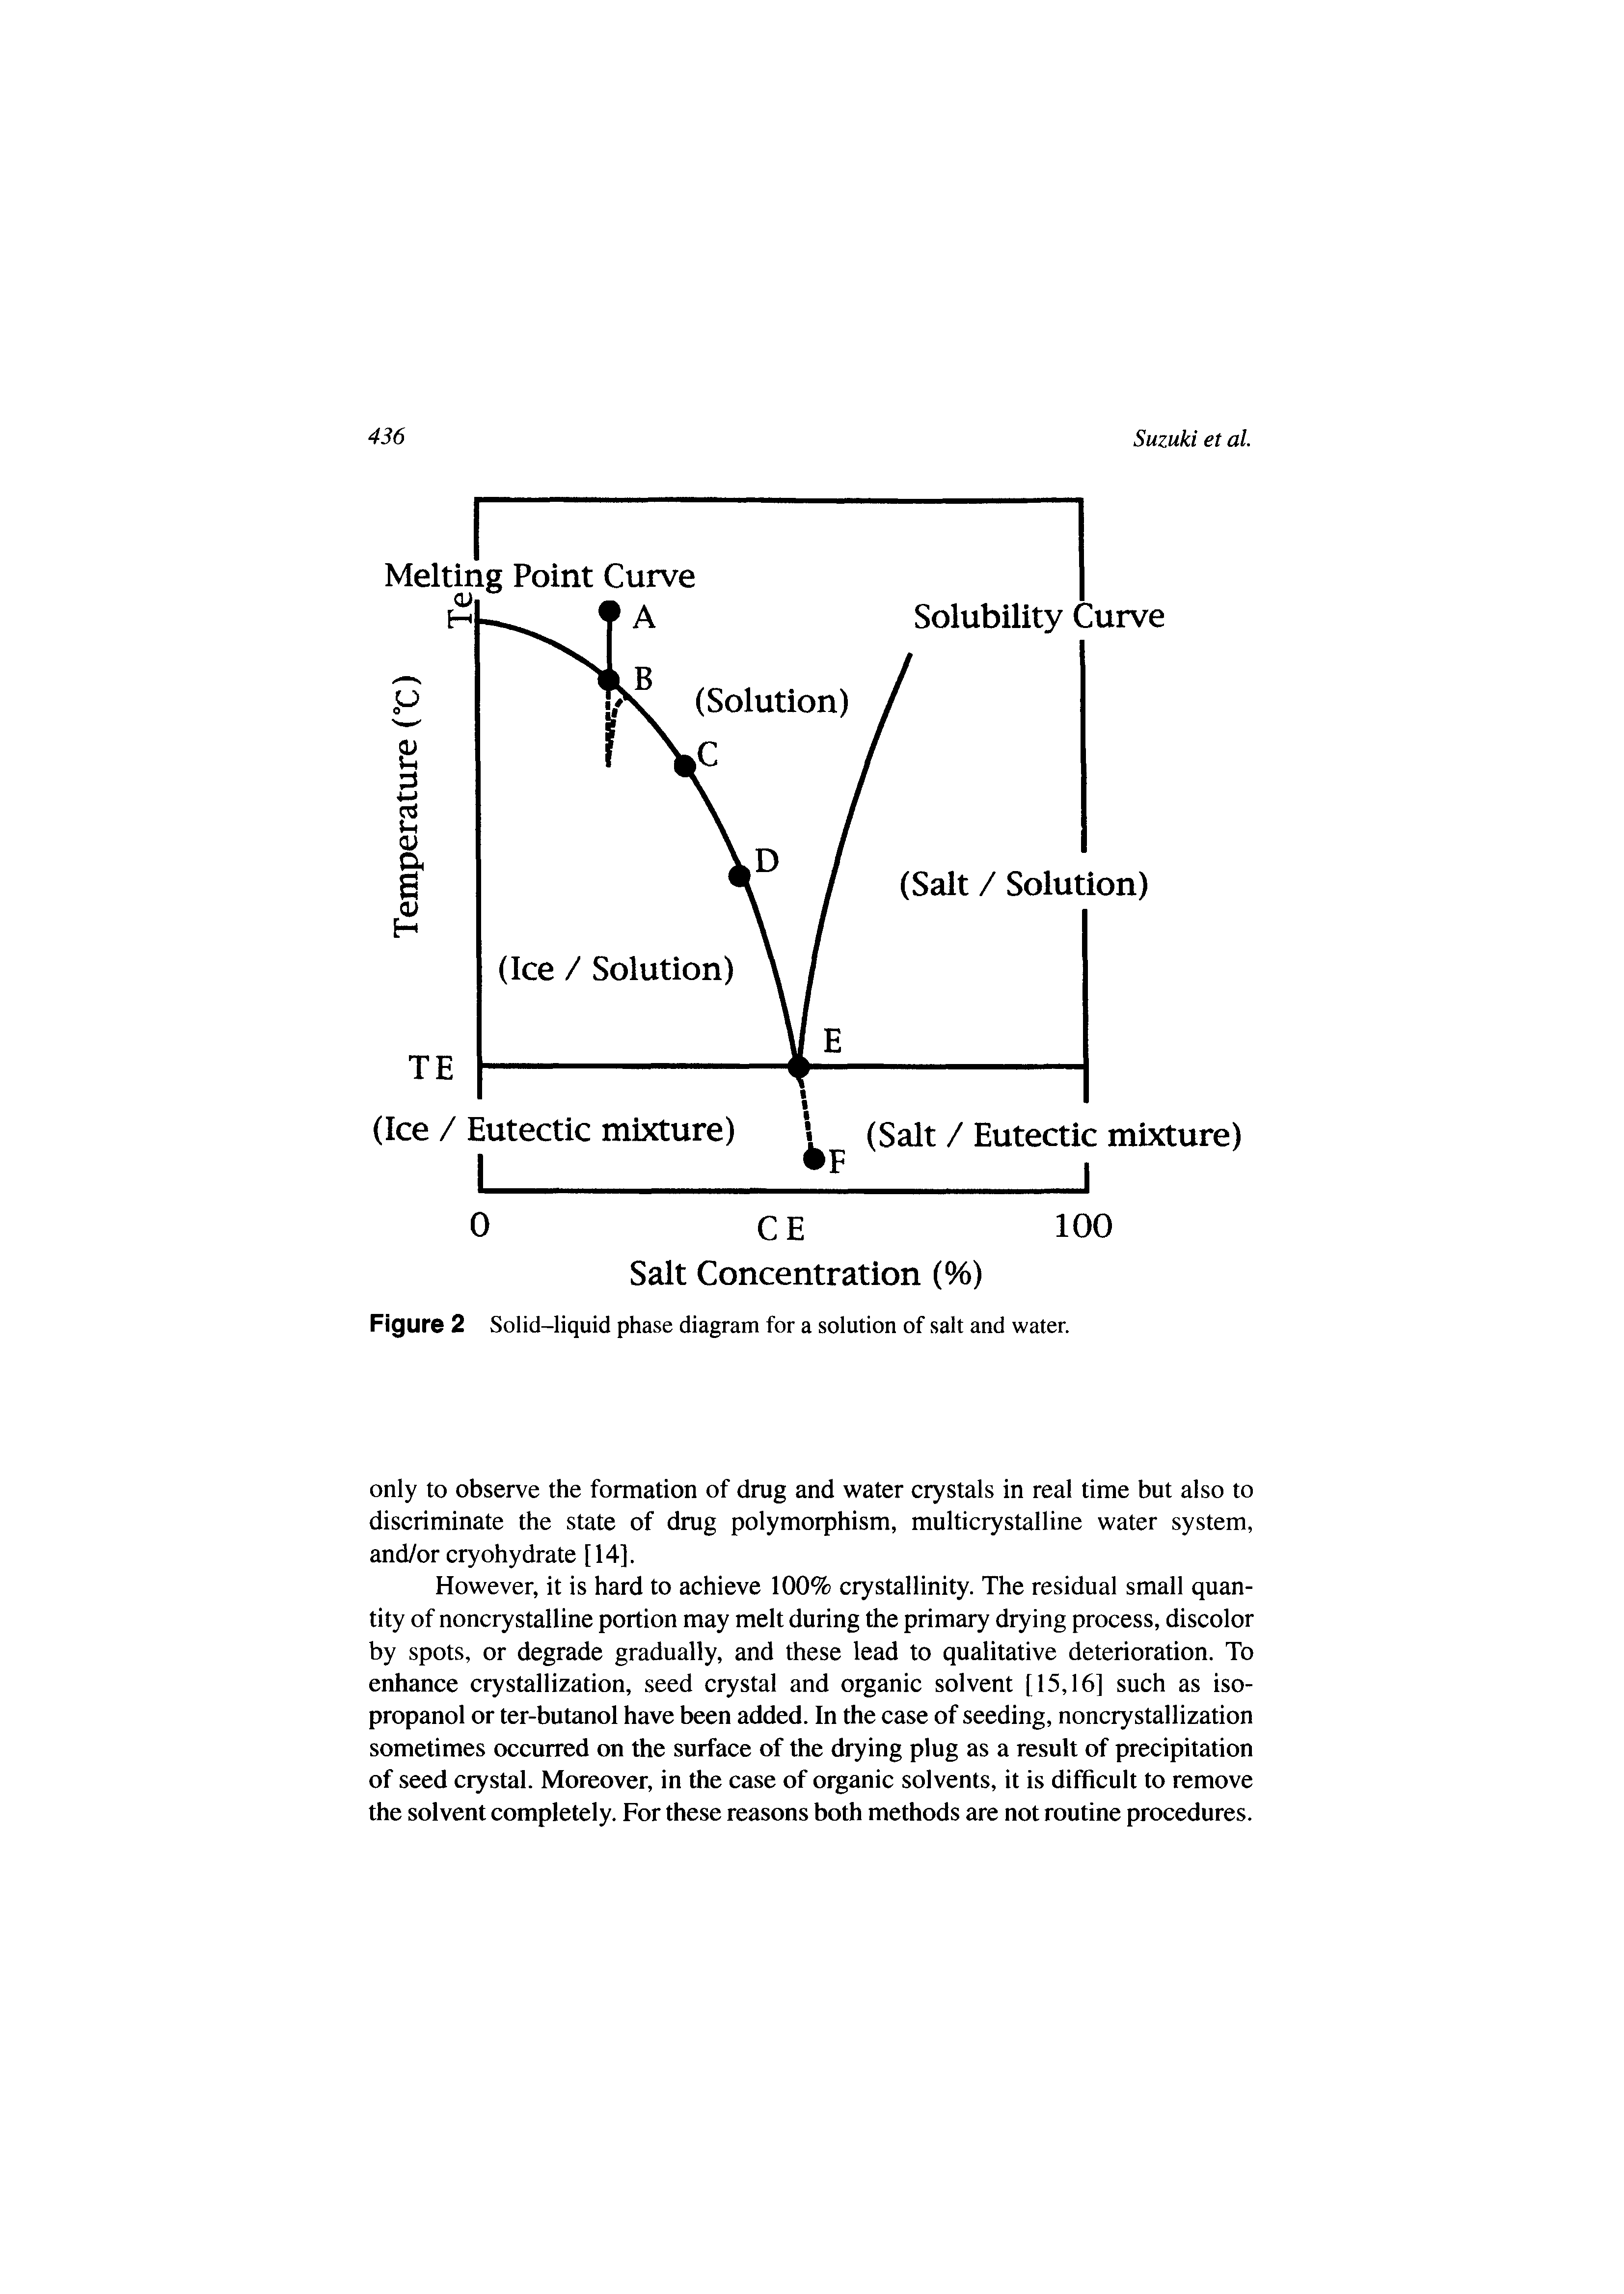 Figure 2 Solid-liquid phase diagram for a solution of salt and water.